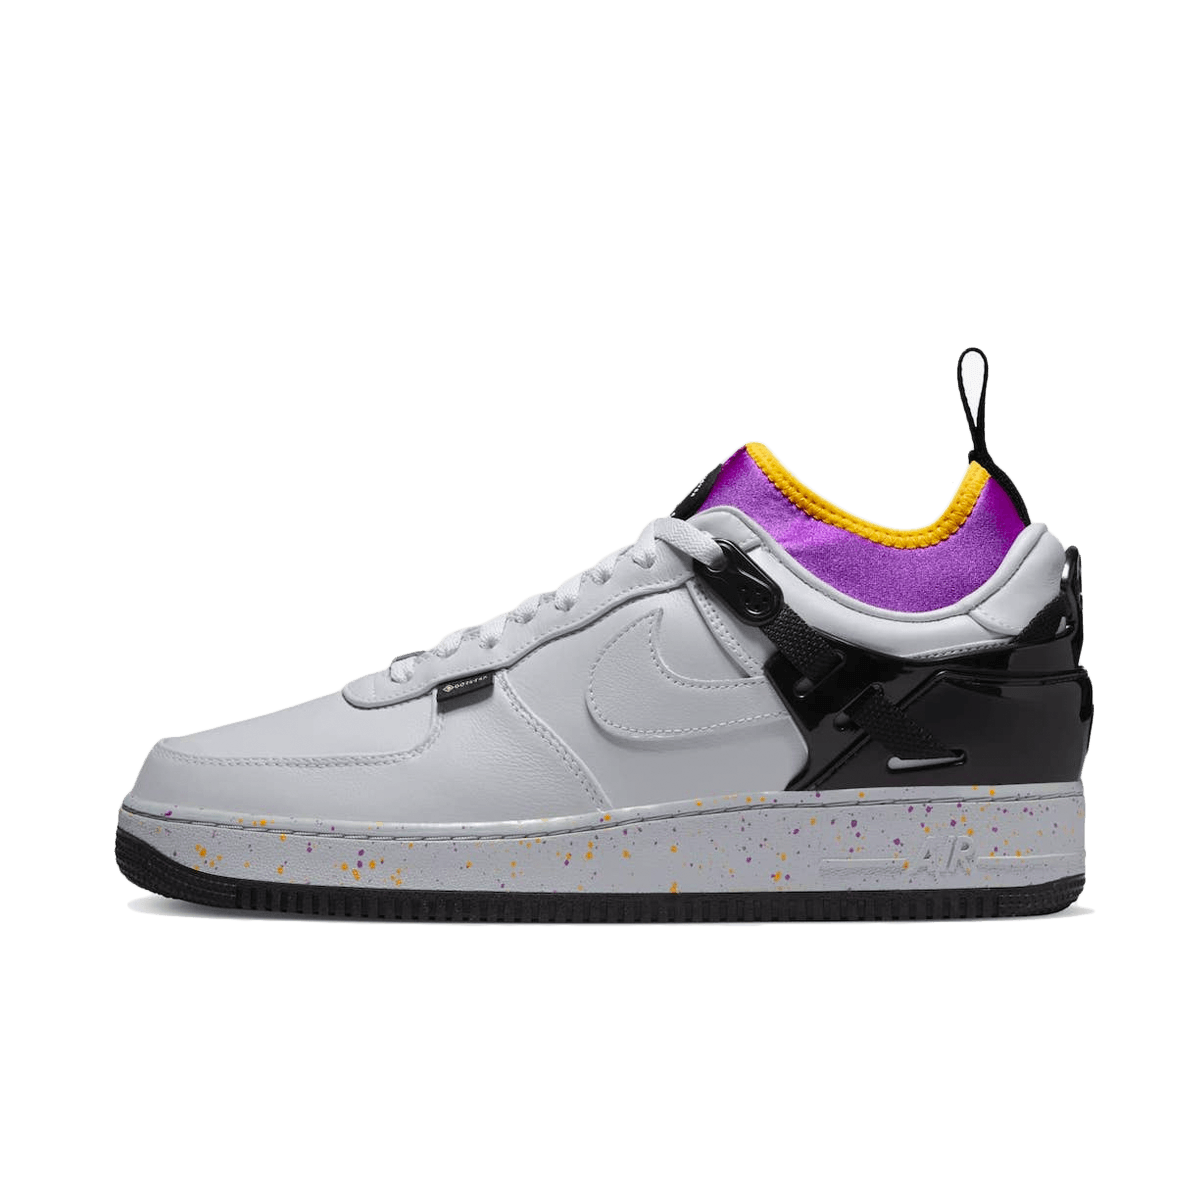 UNDERCOVER x Nike Air Force 1 Low 'Grey Fog' DQ7558-001